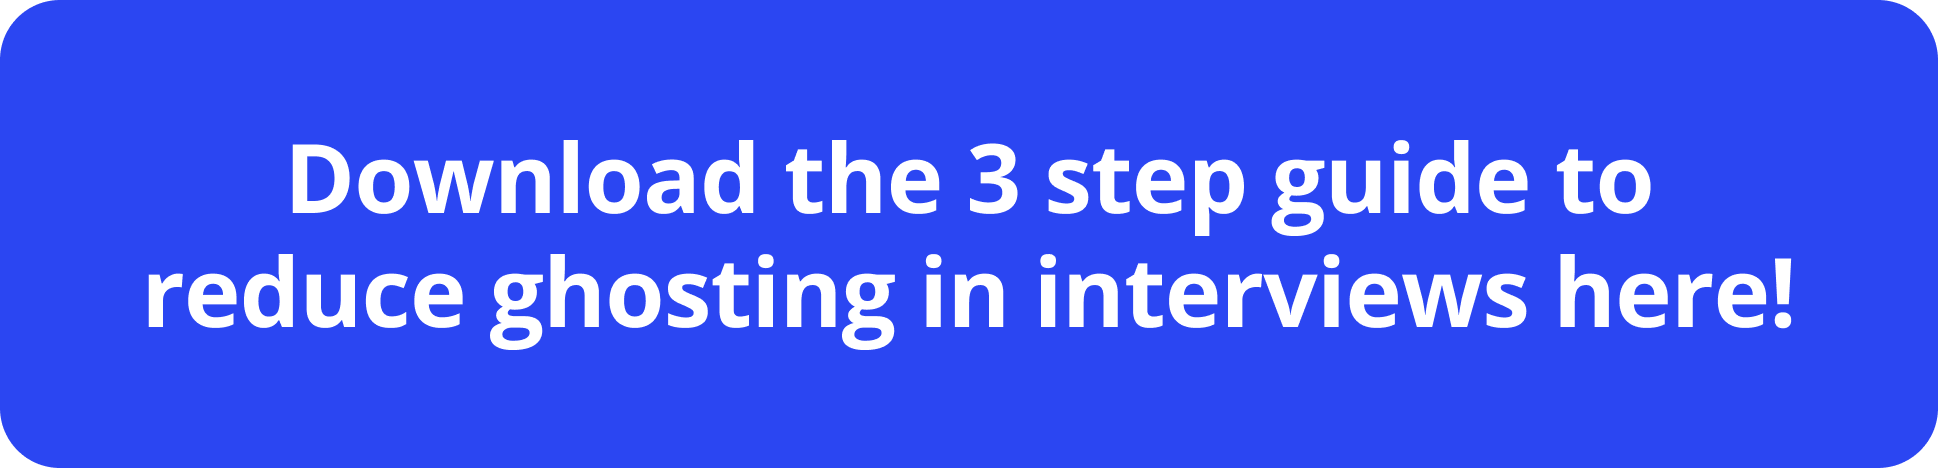 The 3 Step Guide to Reduce Ghosting In Interviews